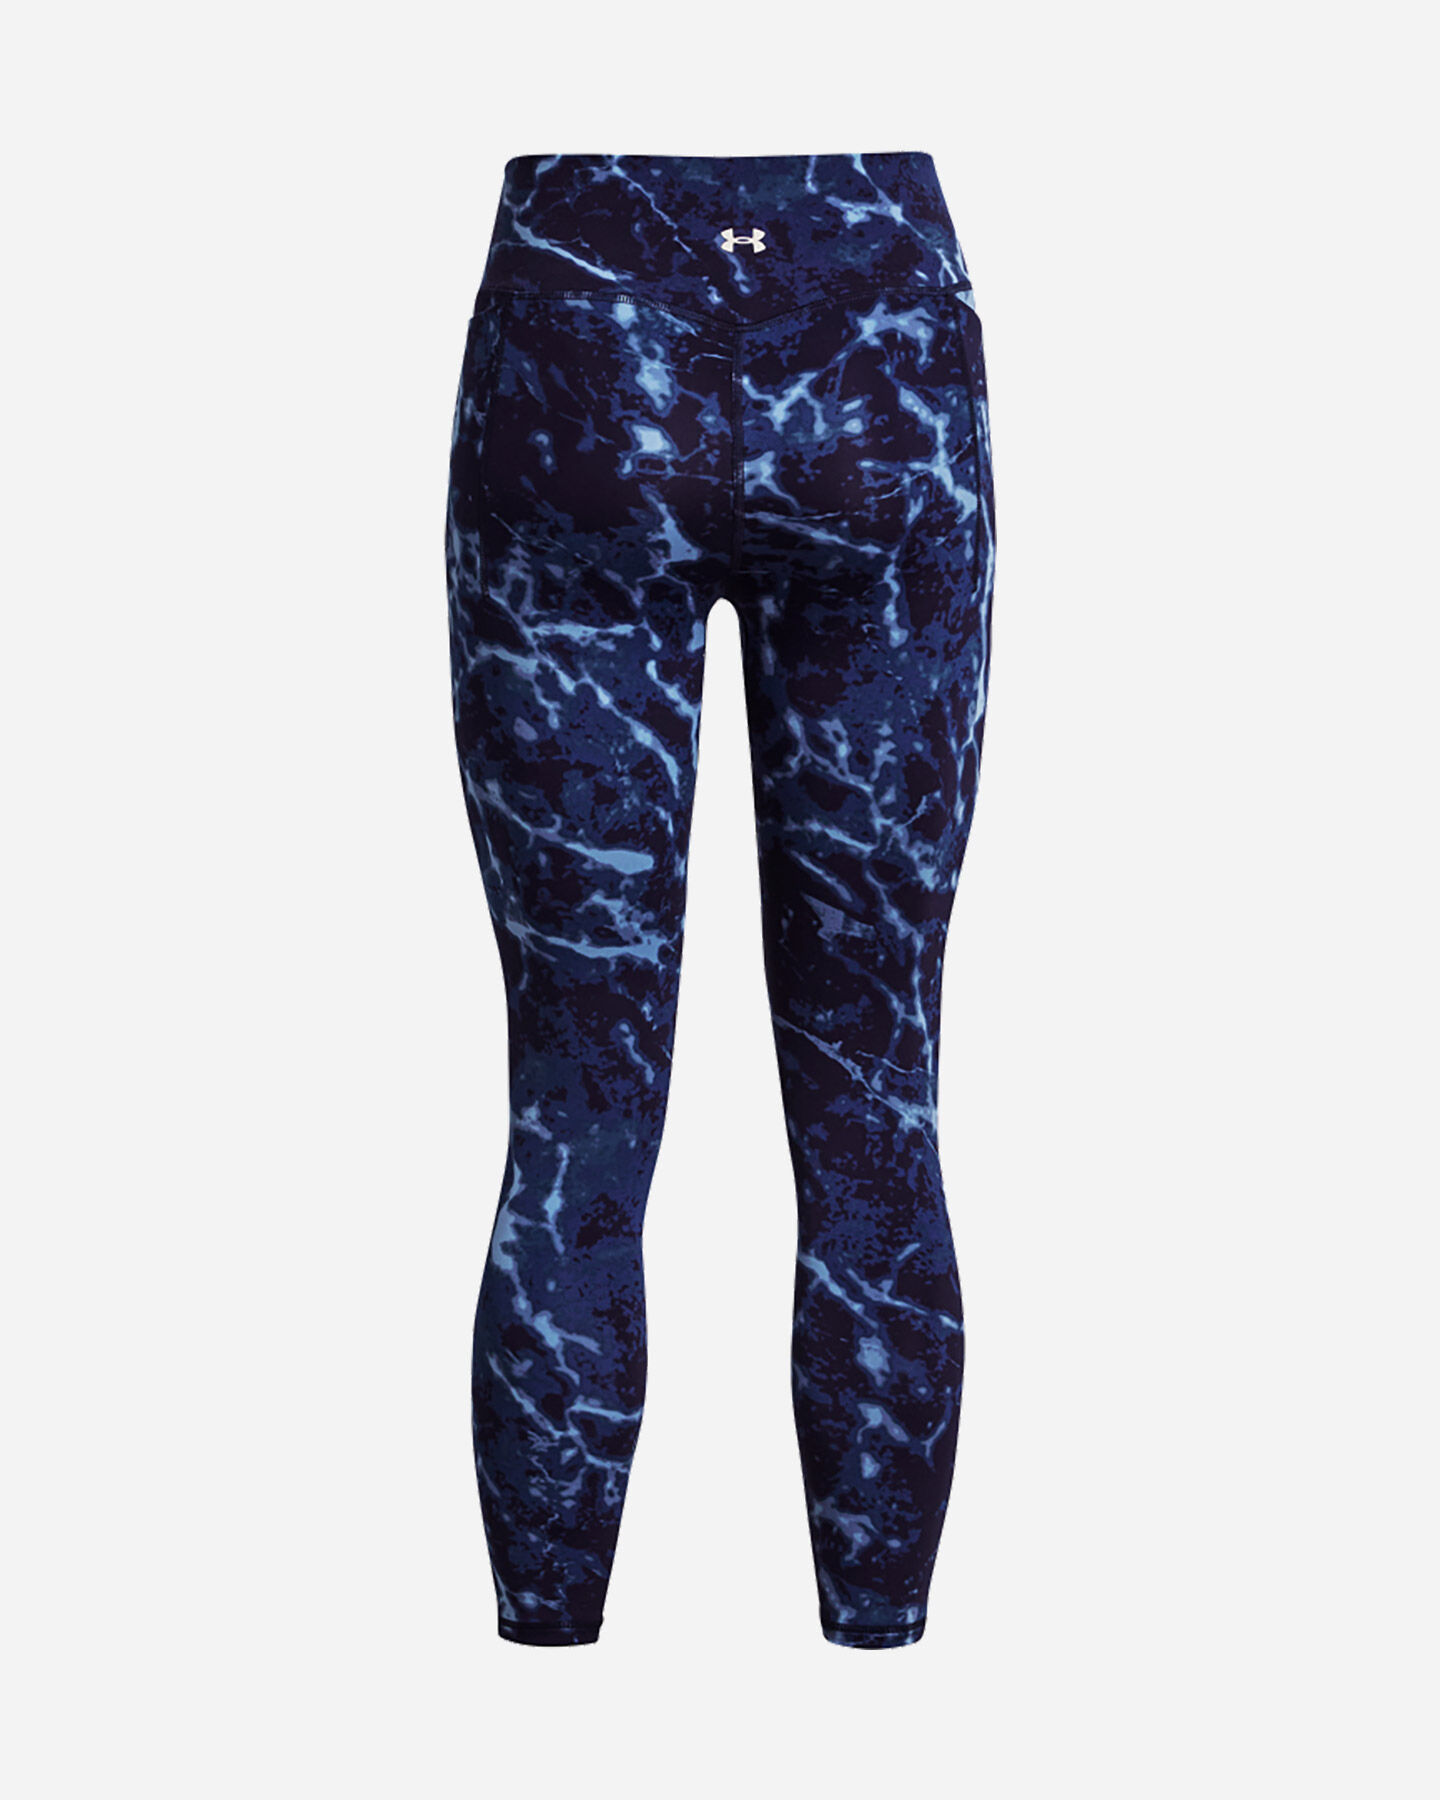  Leggings UNDER ARMOUR THE ROCK ALL OVER W S5579877|0410|XS scatto 1